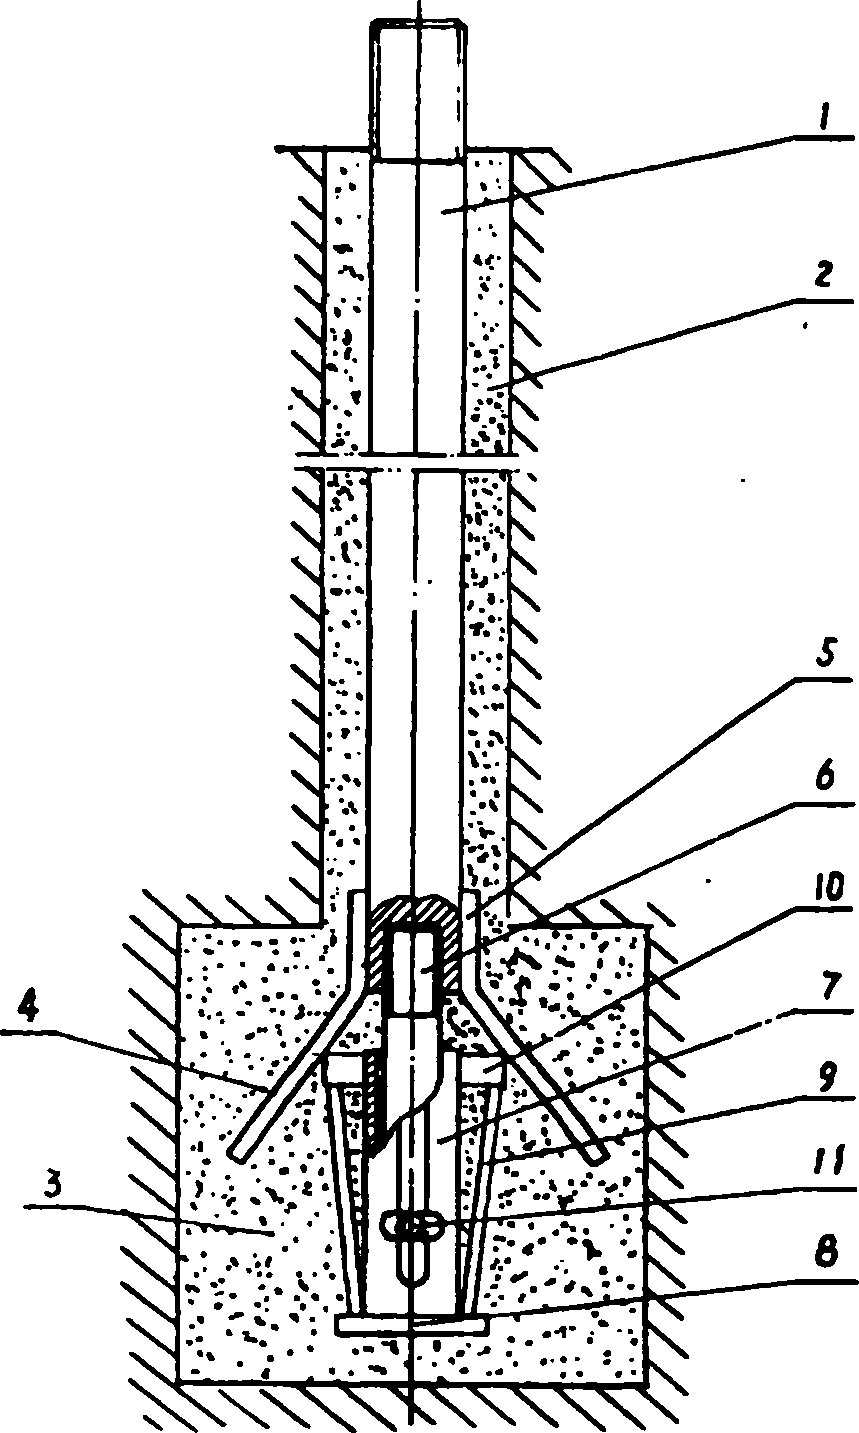 Anchoring method and end-bearing anchor